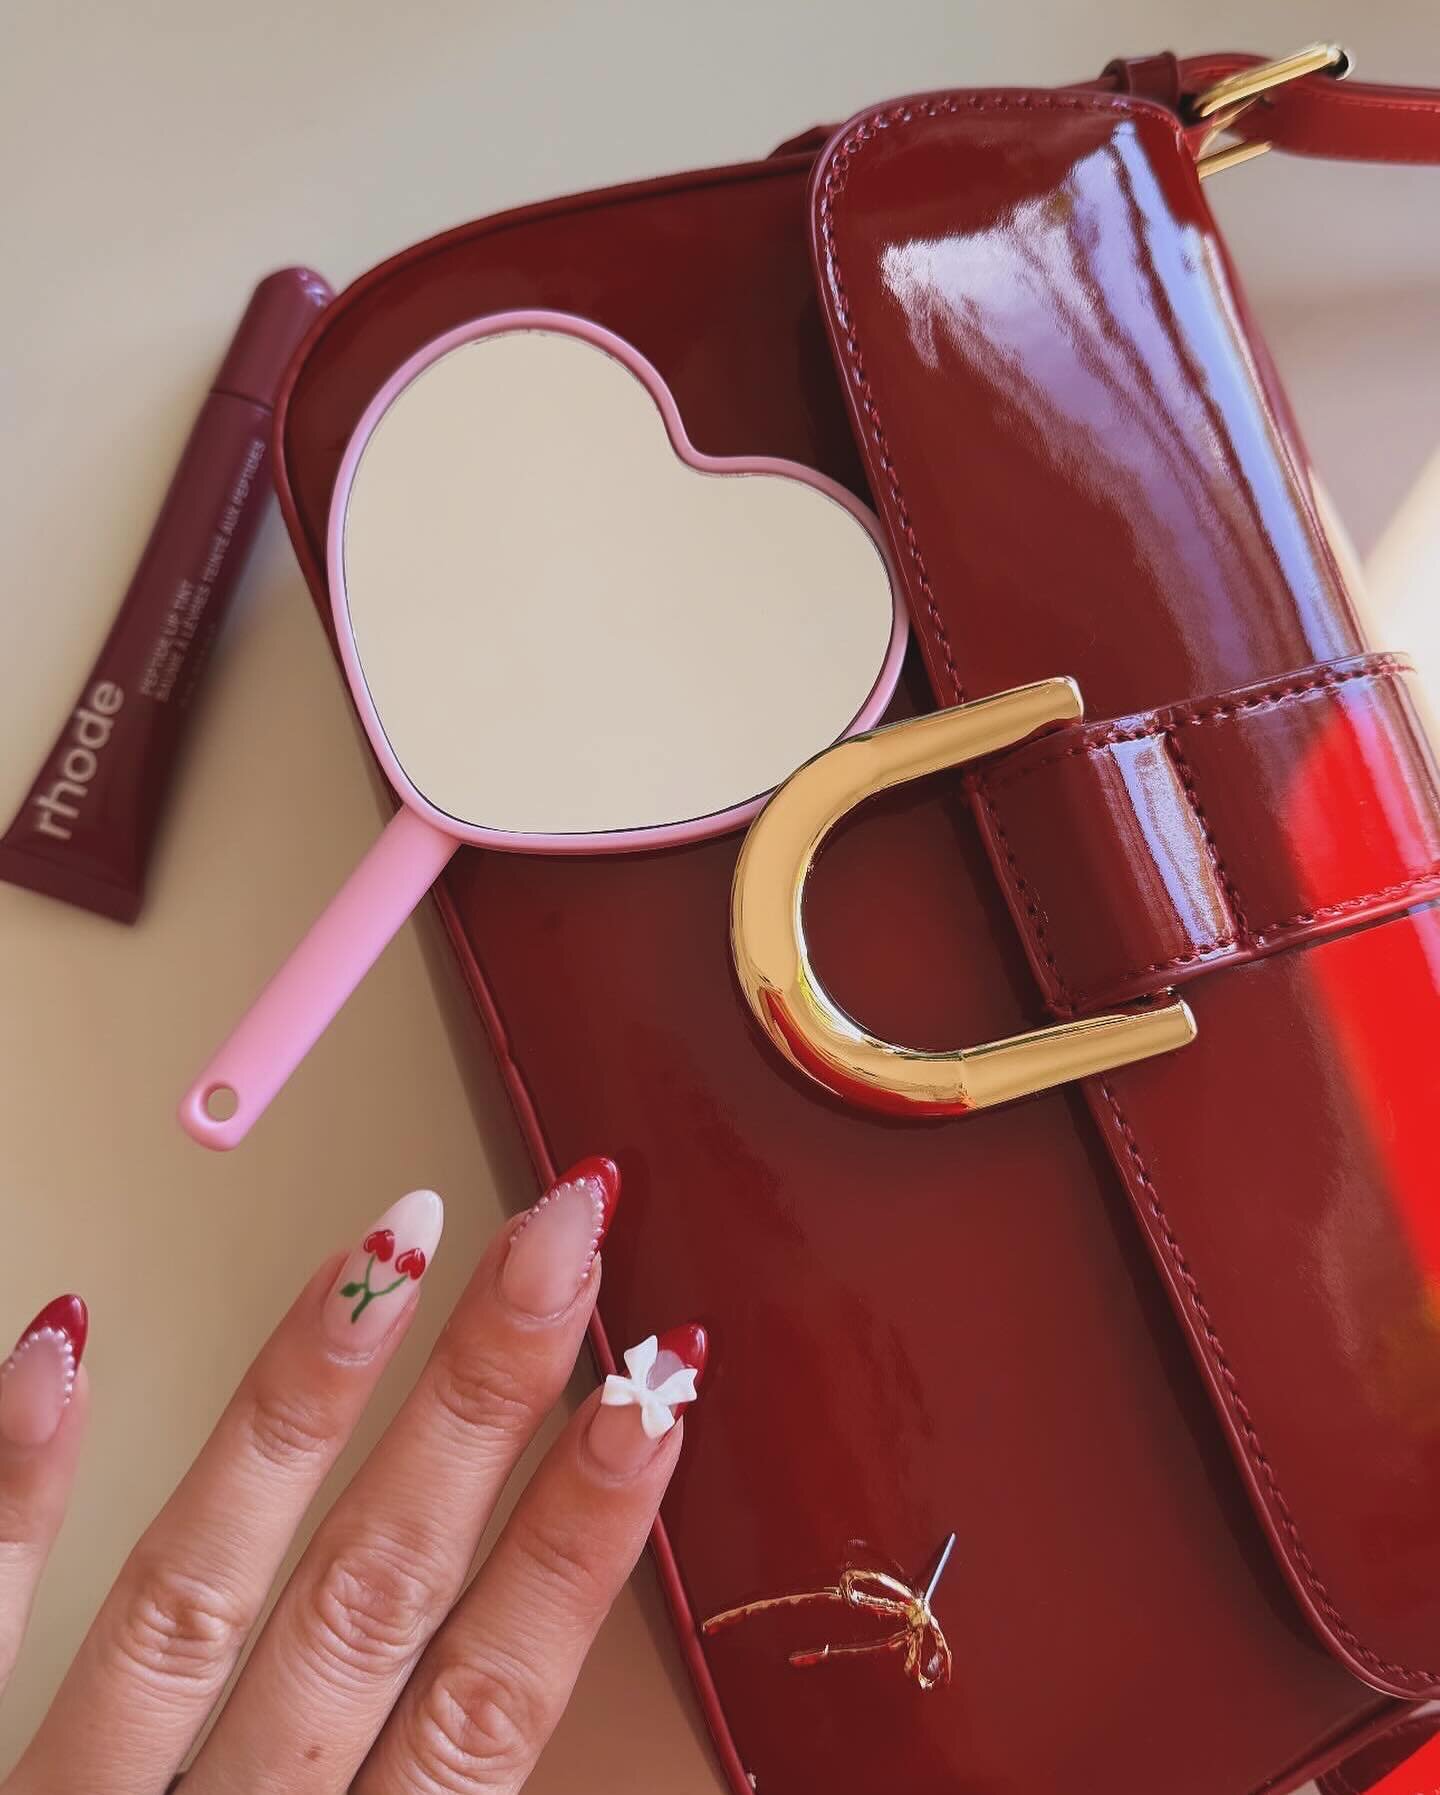 Happy Valentines 💌🪞💐
Today is about celebrating love in every form as much as it is about romantic love 💘 💋 

Nails by Ana L. @manicure_anny27 

#nailsalon #miaminails #nailsmiami #nailart 
#bestnailsmiami #valentines #valentinesnails #valentine